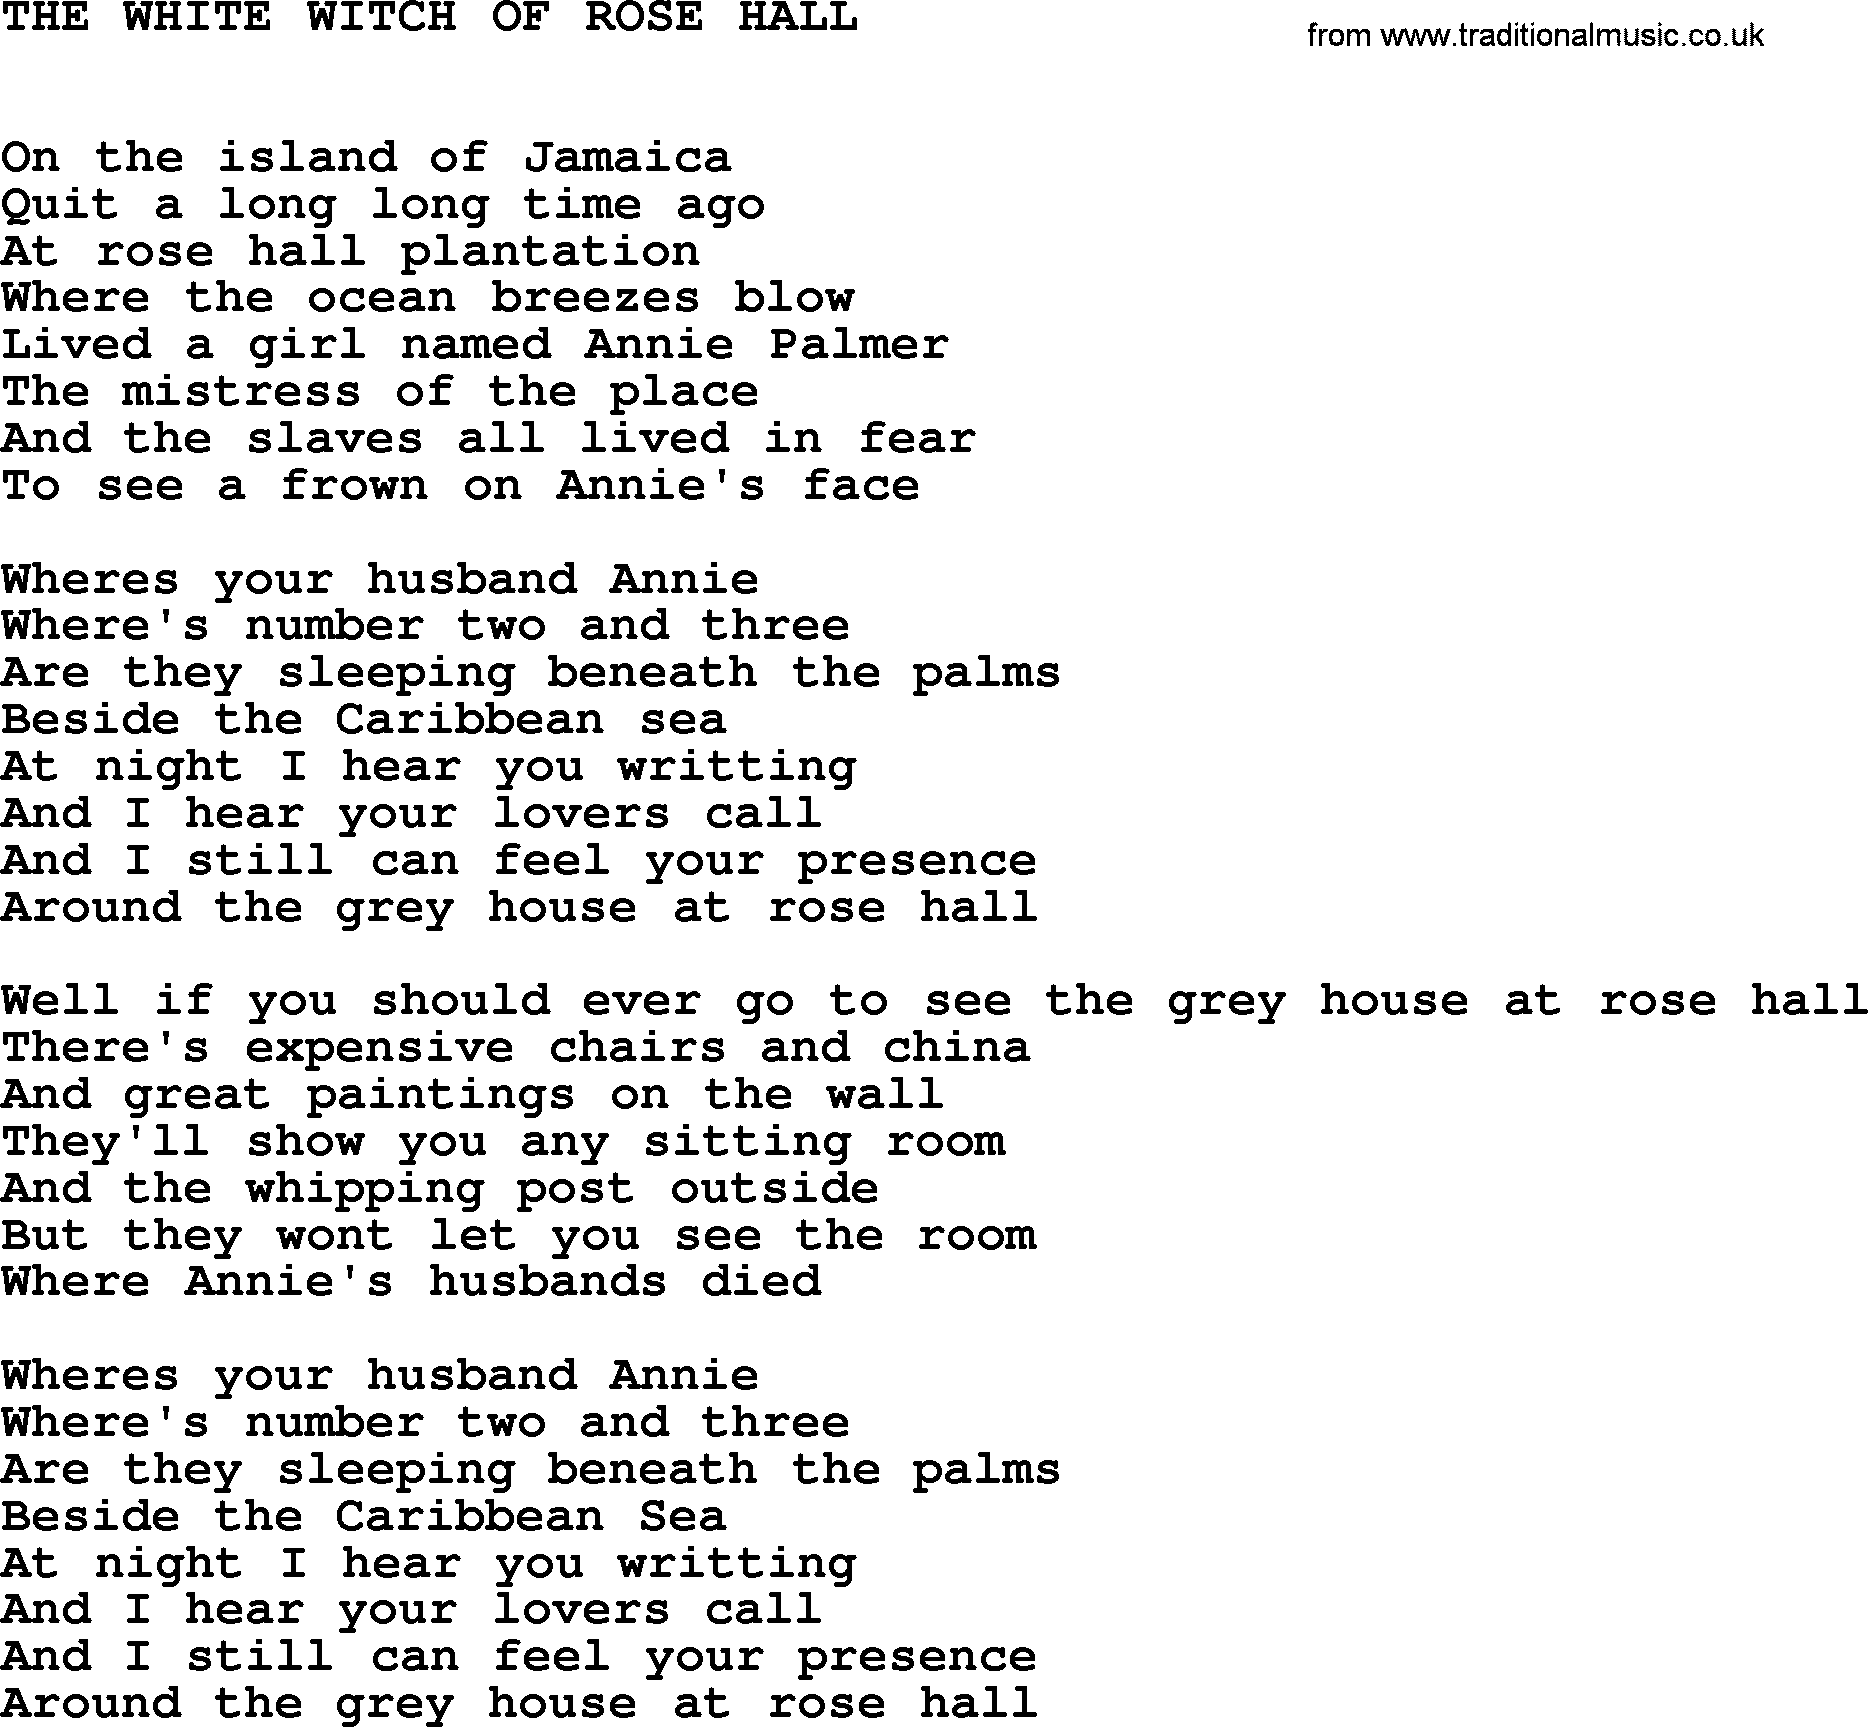 Johnny Cash song The White Witch Of Rose Hall.txt lyrics